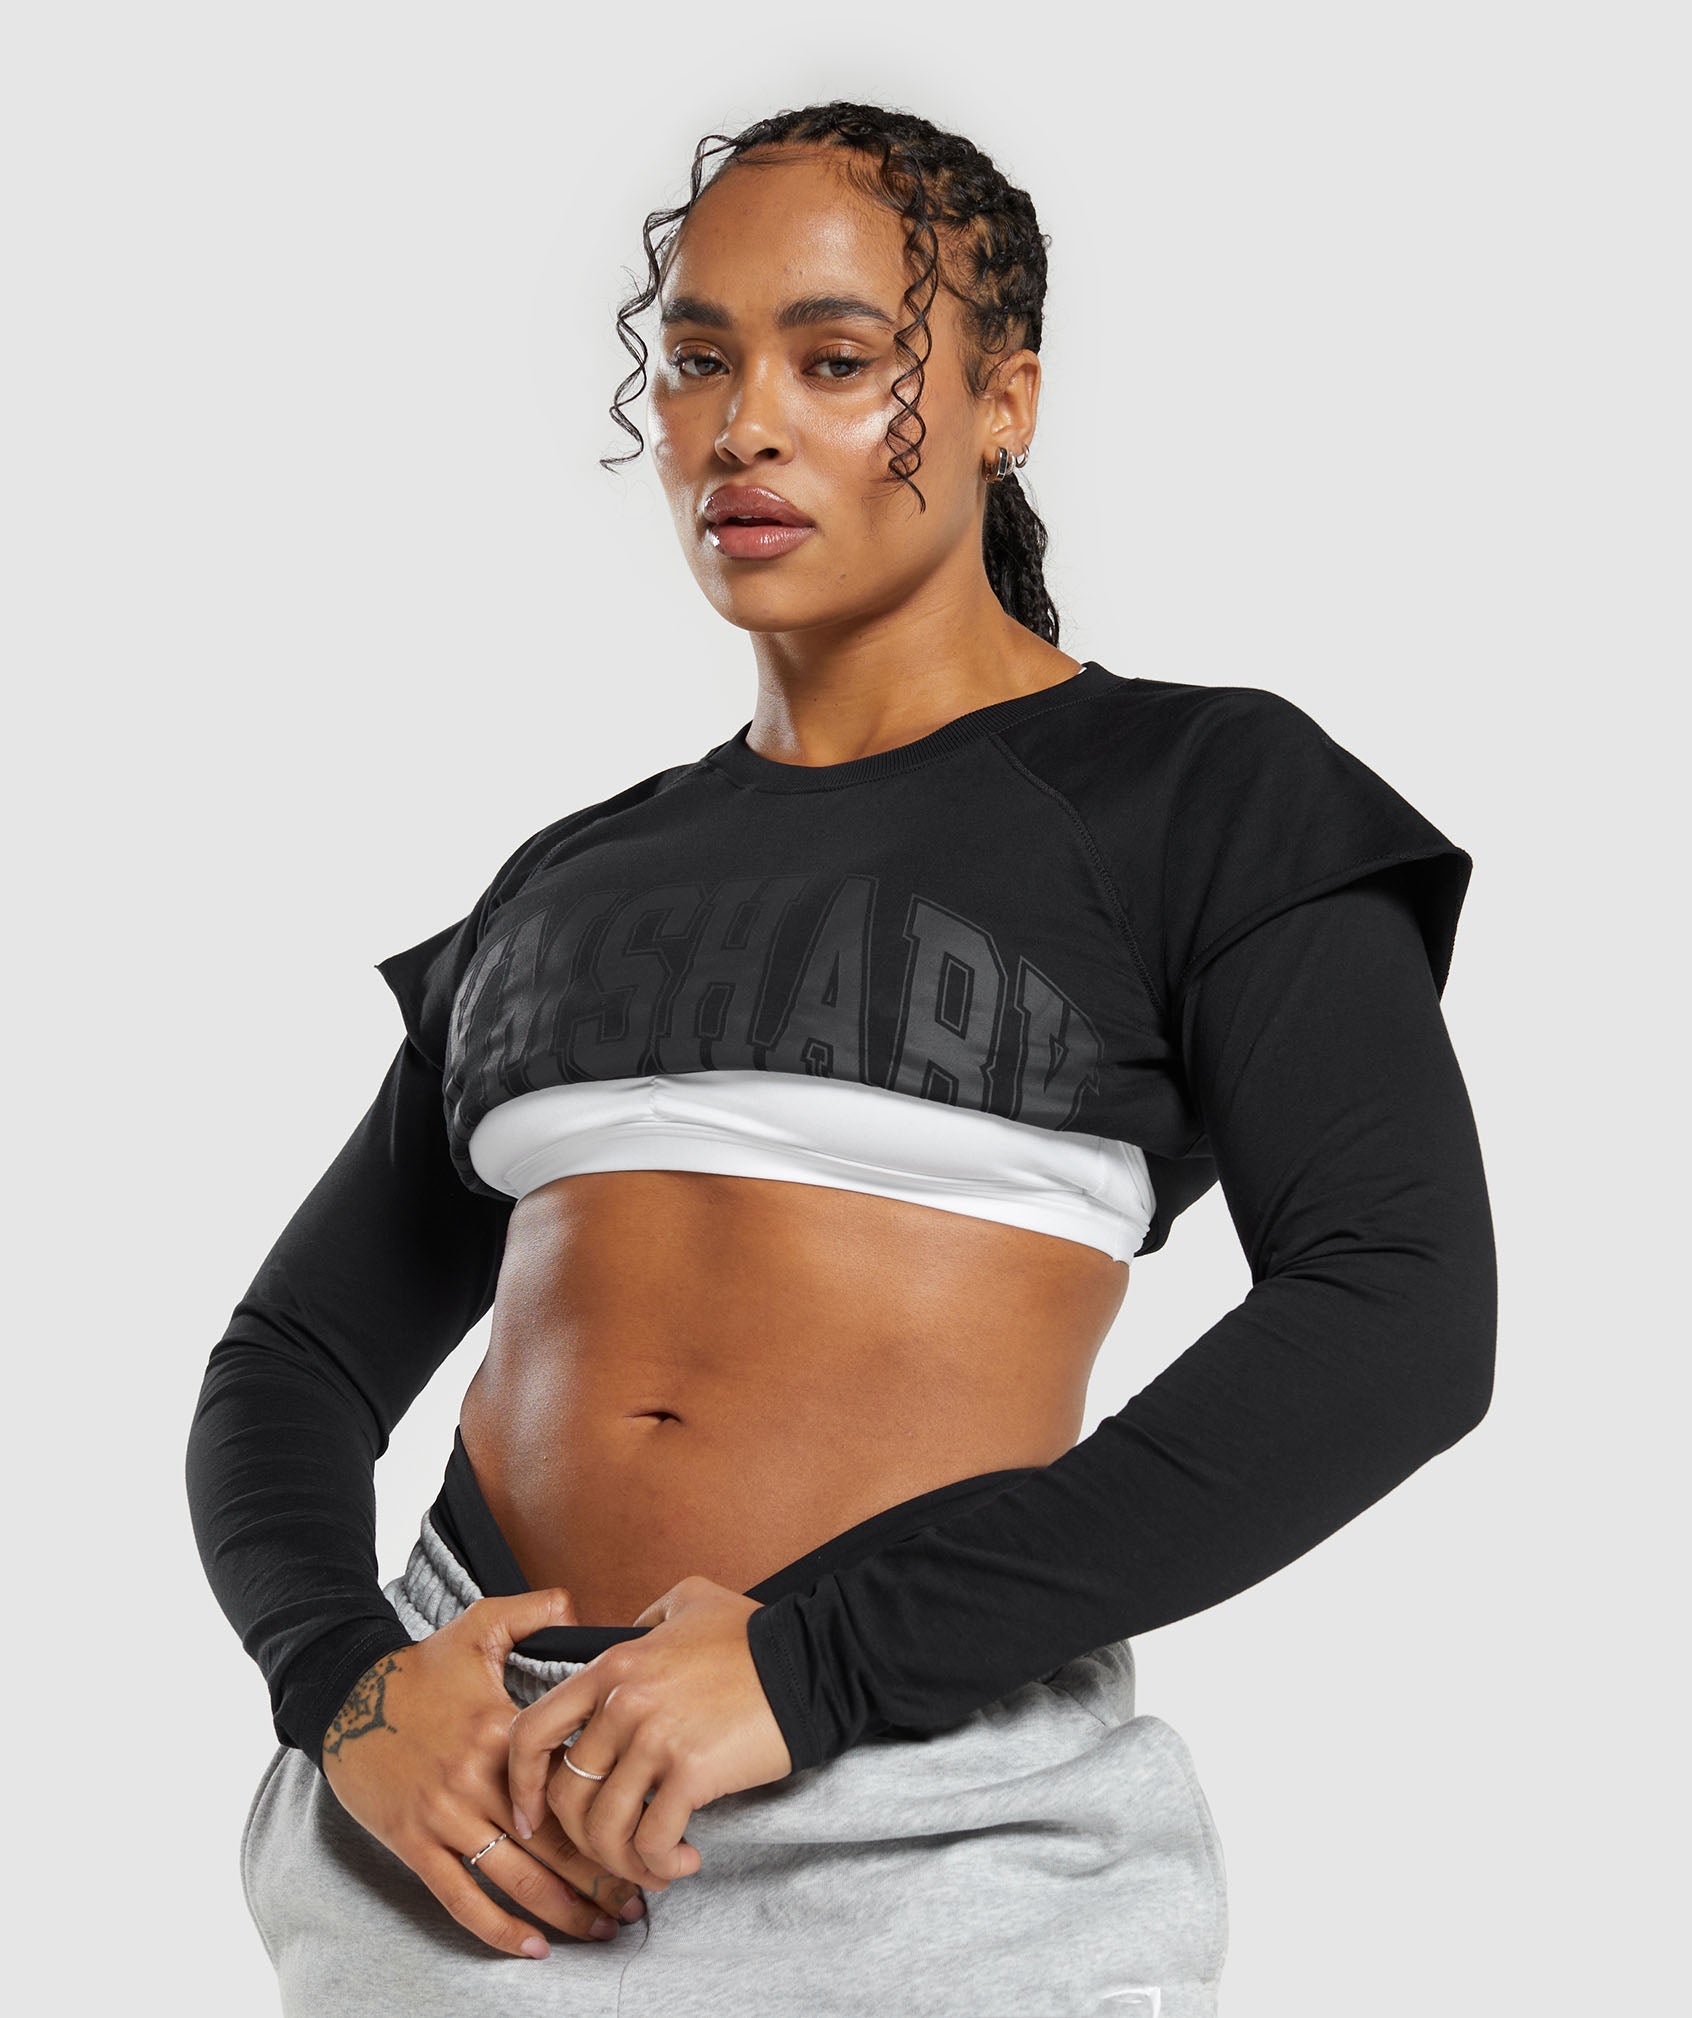 Gymshark Vision Black Long Sleeve Crop Top - Gym Training Top - Size Small